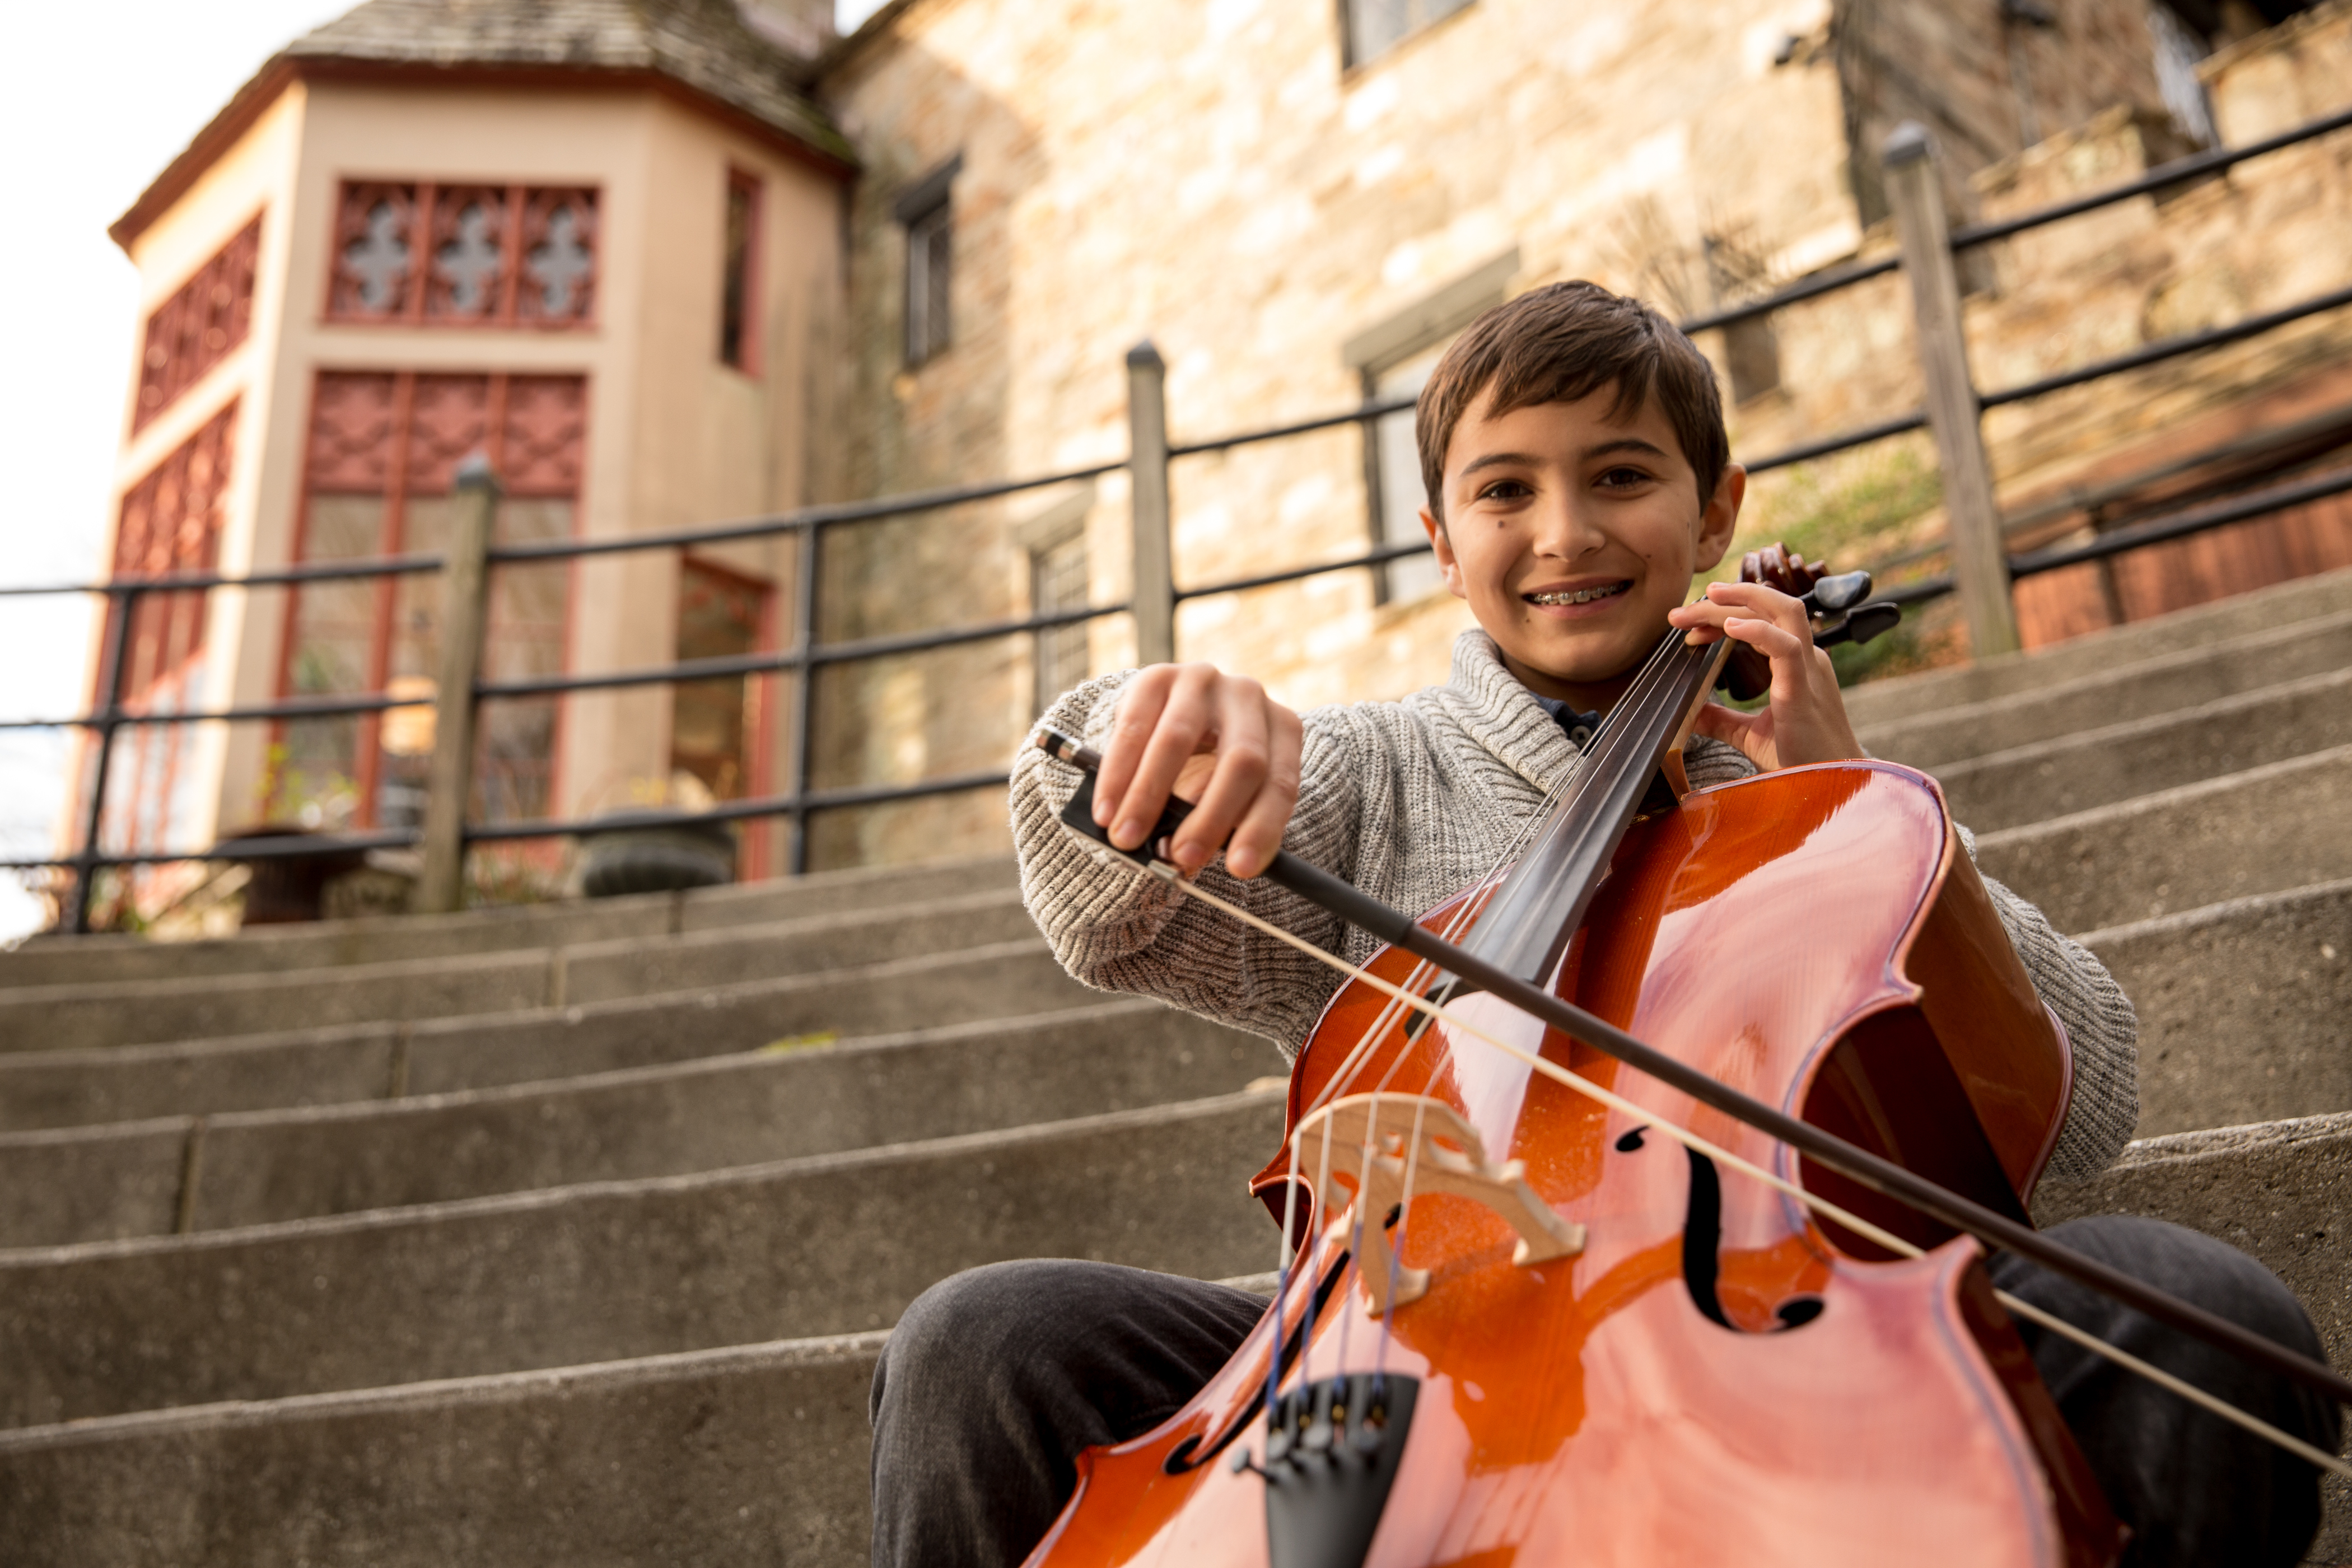 Tips and Advice for Cello Players